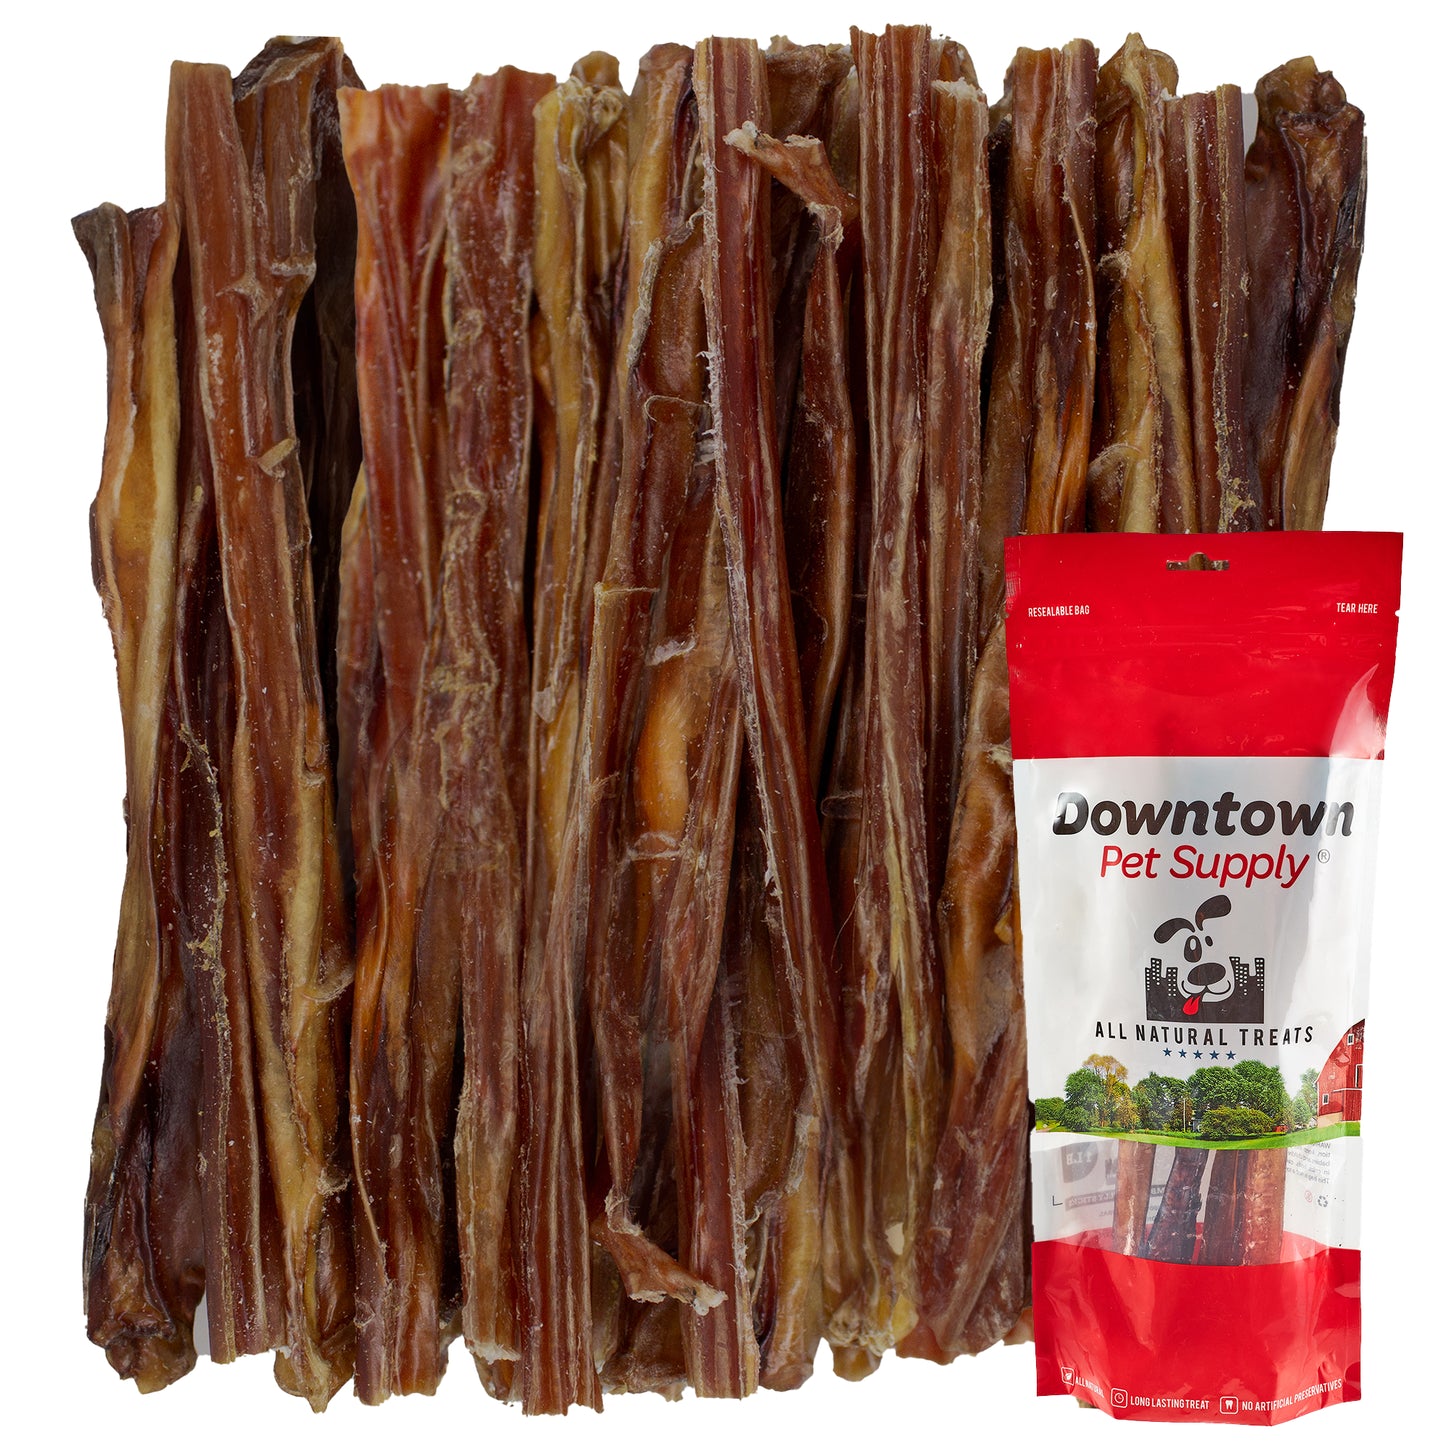 6 and 12 inch Junior Thin USA Bully Sticks for Dogs (Bulk Bags by Weight) Made in USA - Odorless All Natural Dog Dental Chew Treats, High in Protein, Great Alternative to Rawhides